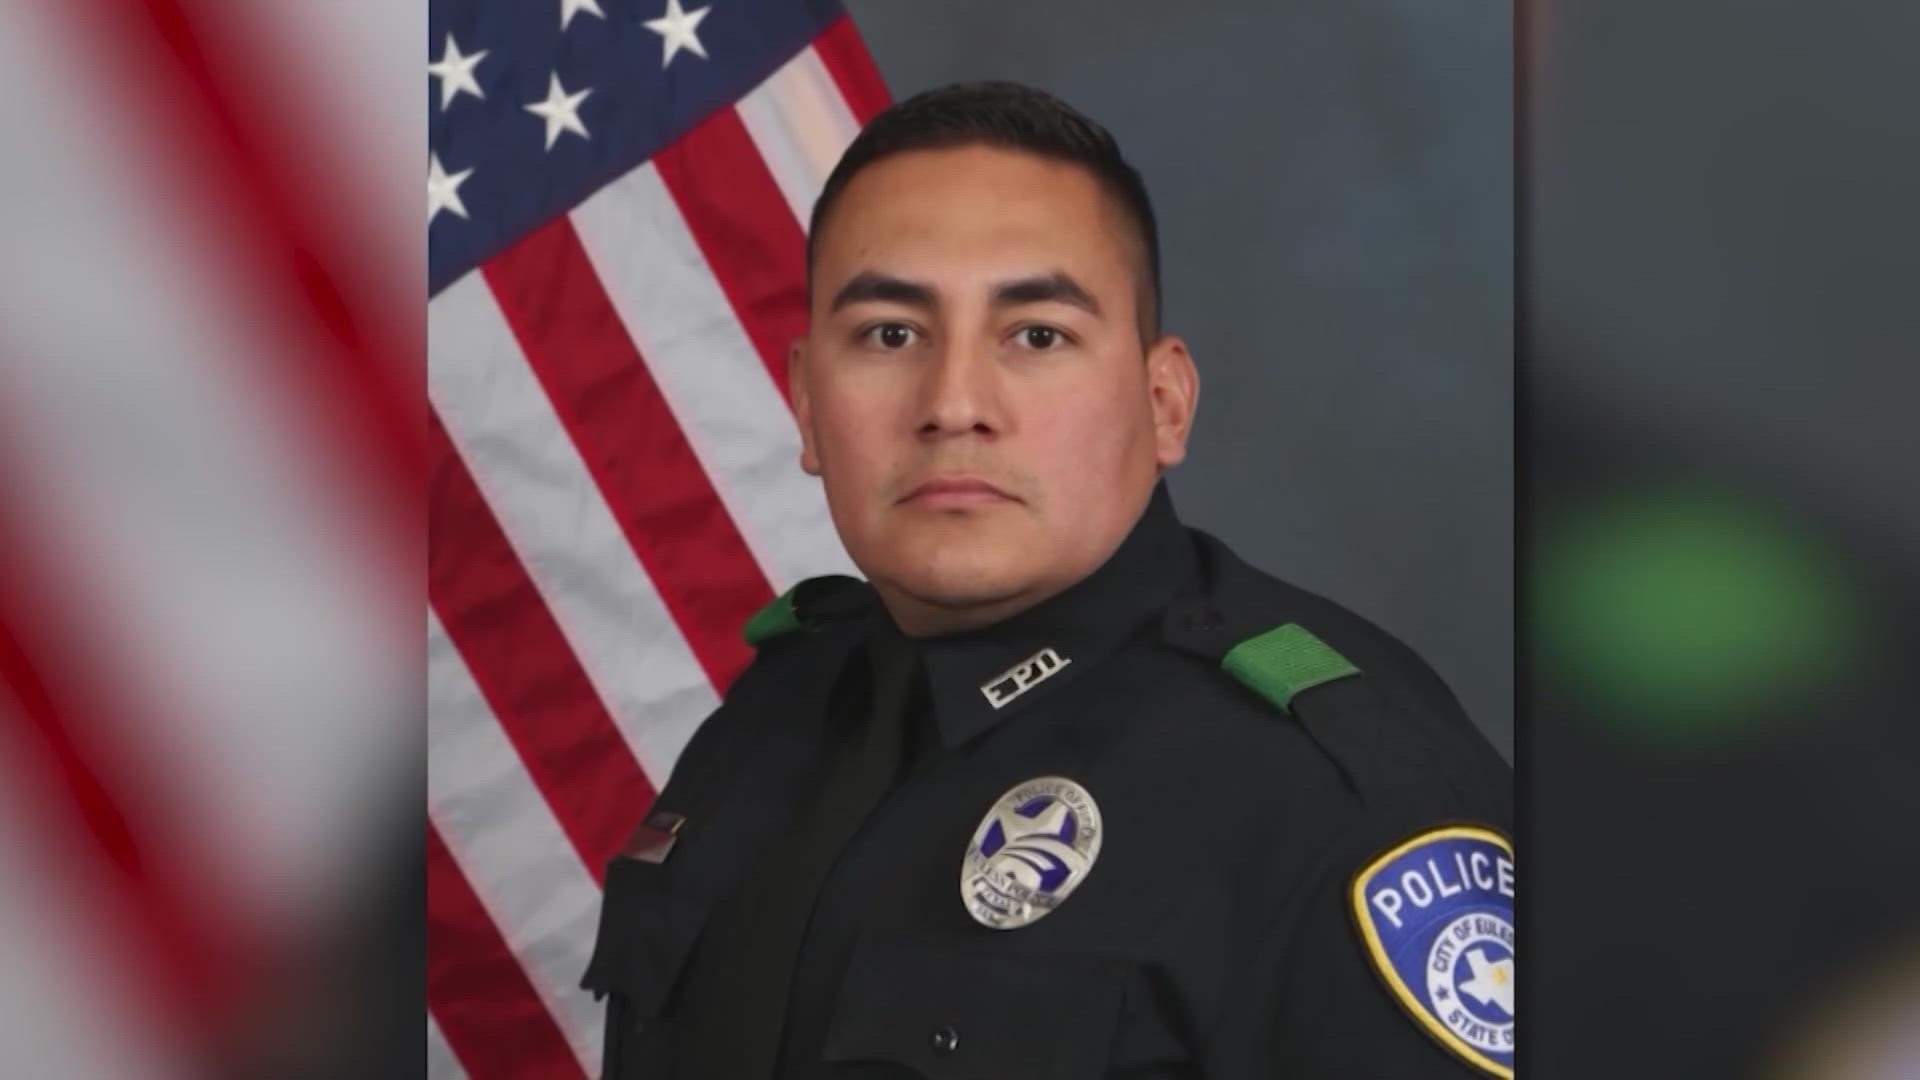 Euless Police Department Detective Alex Cervantes was killed after a drunk driver crashed into his vehicle.